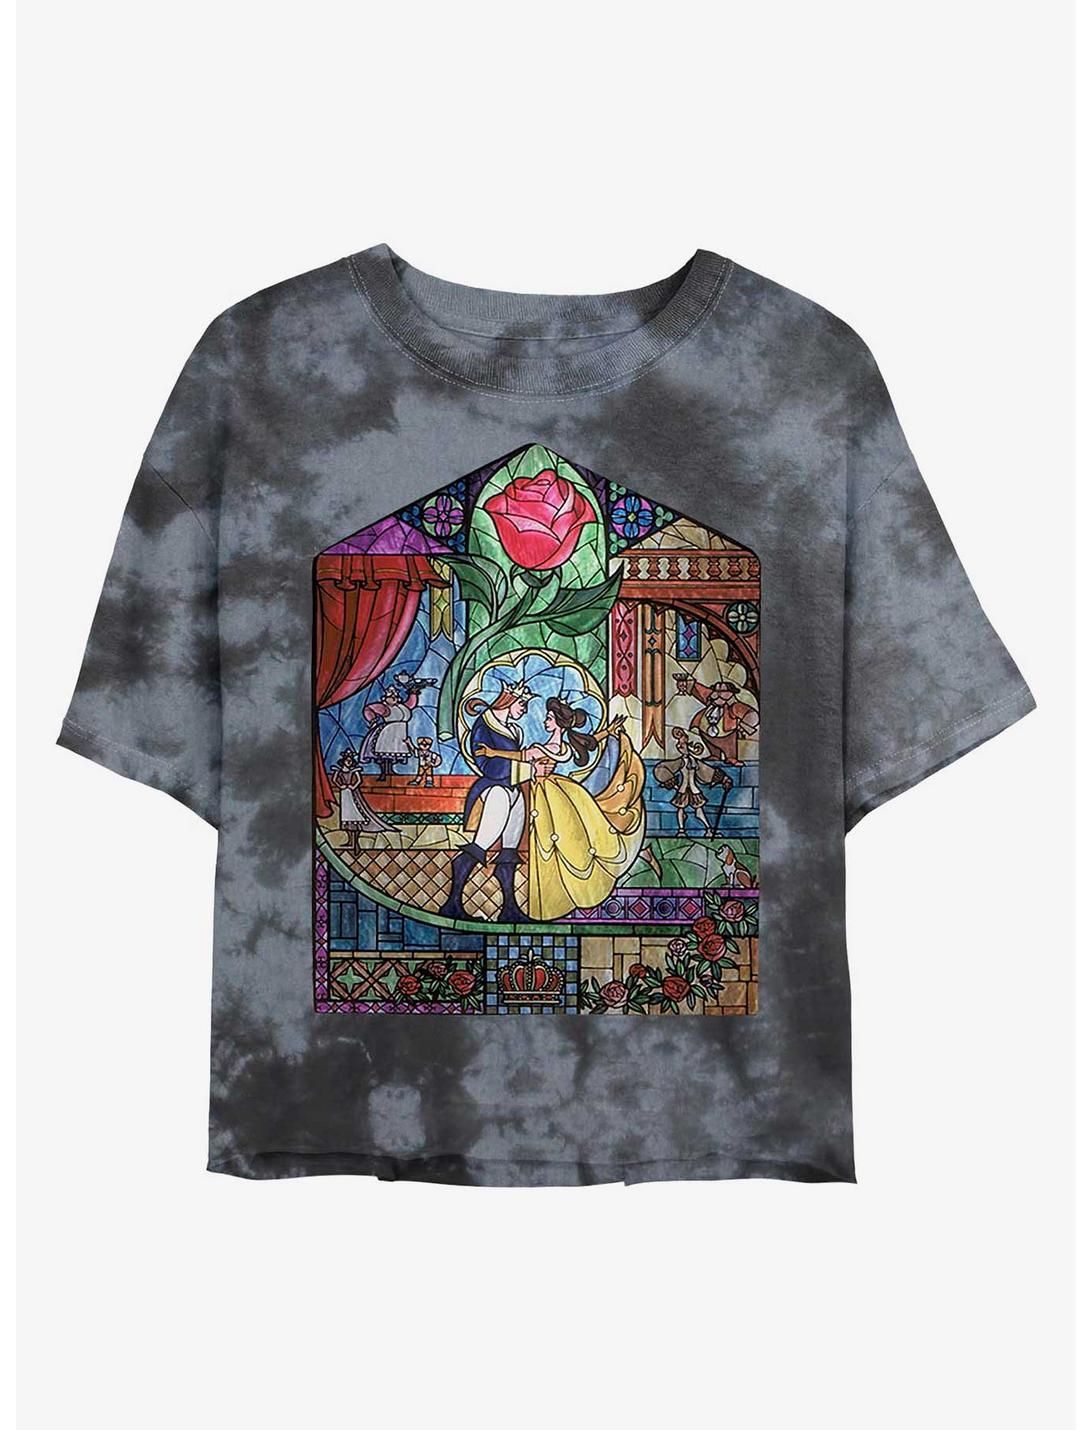 Disney Beauty And The Beast Stained Glass Womens Tie-Dye Crop T-Shirt, BLKCHAR, hi-res